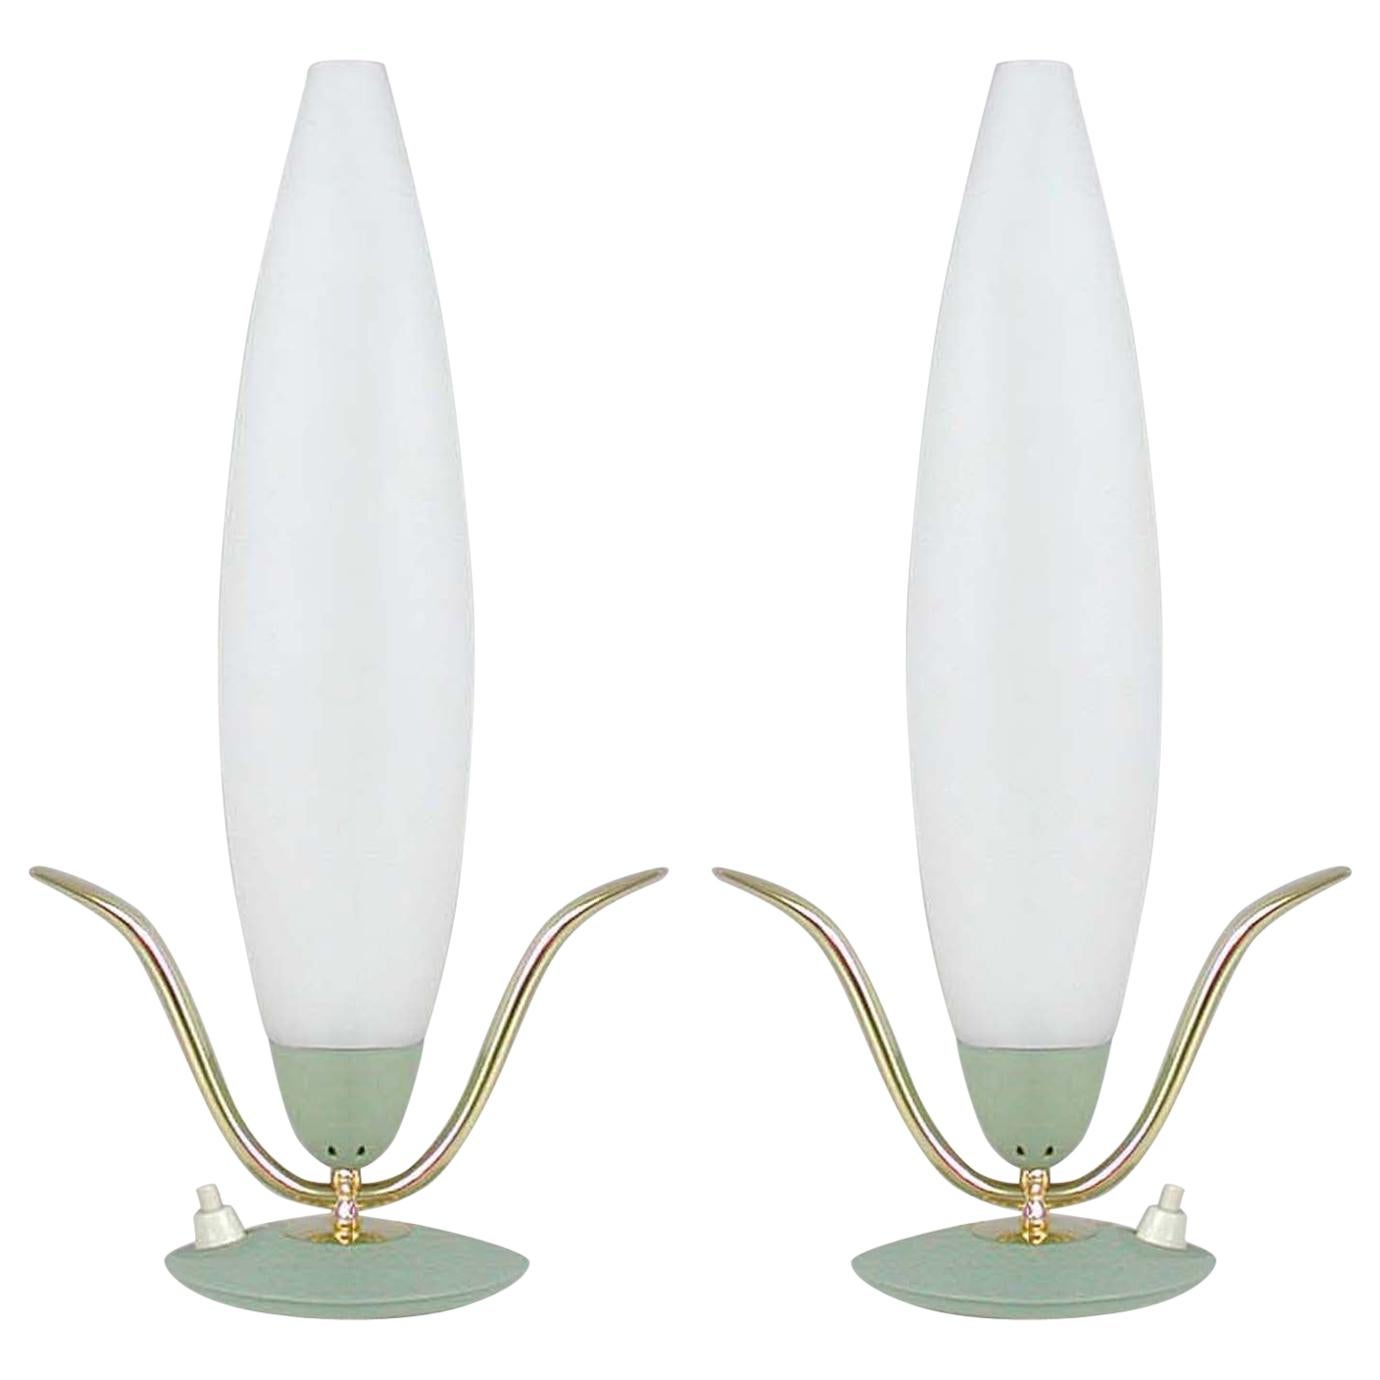 Midcentury Italian Sputnik Mint and Satinated Glass Table Lamps, 1950s, Set of 2